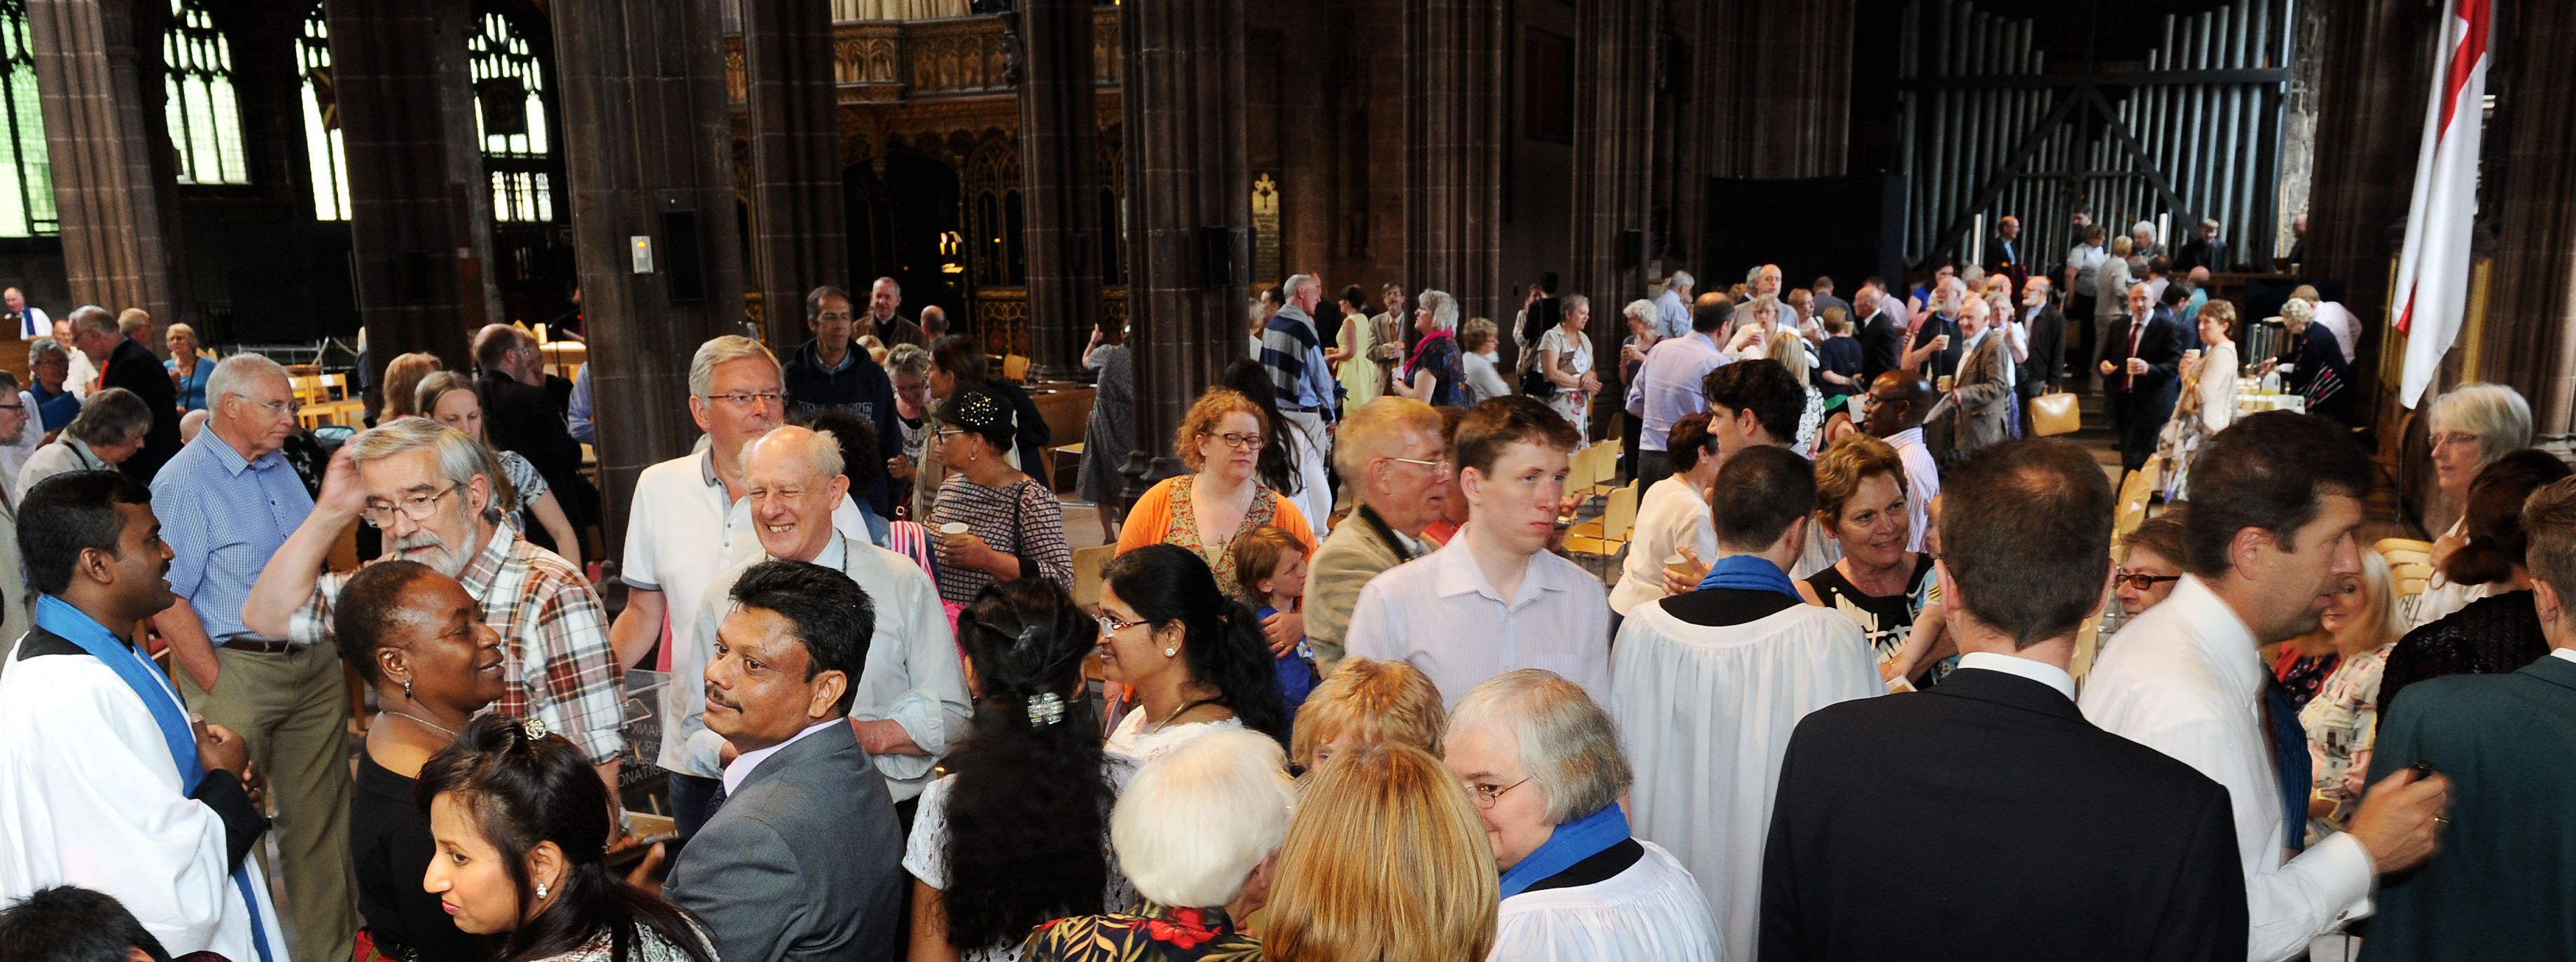 Diverse group of people in the cathedral